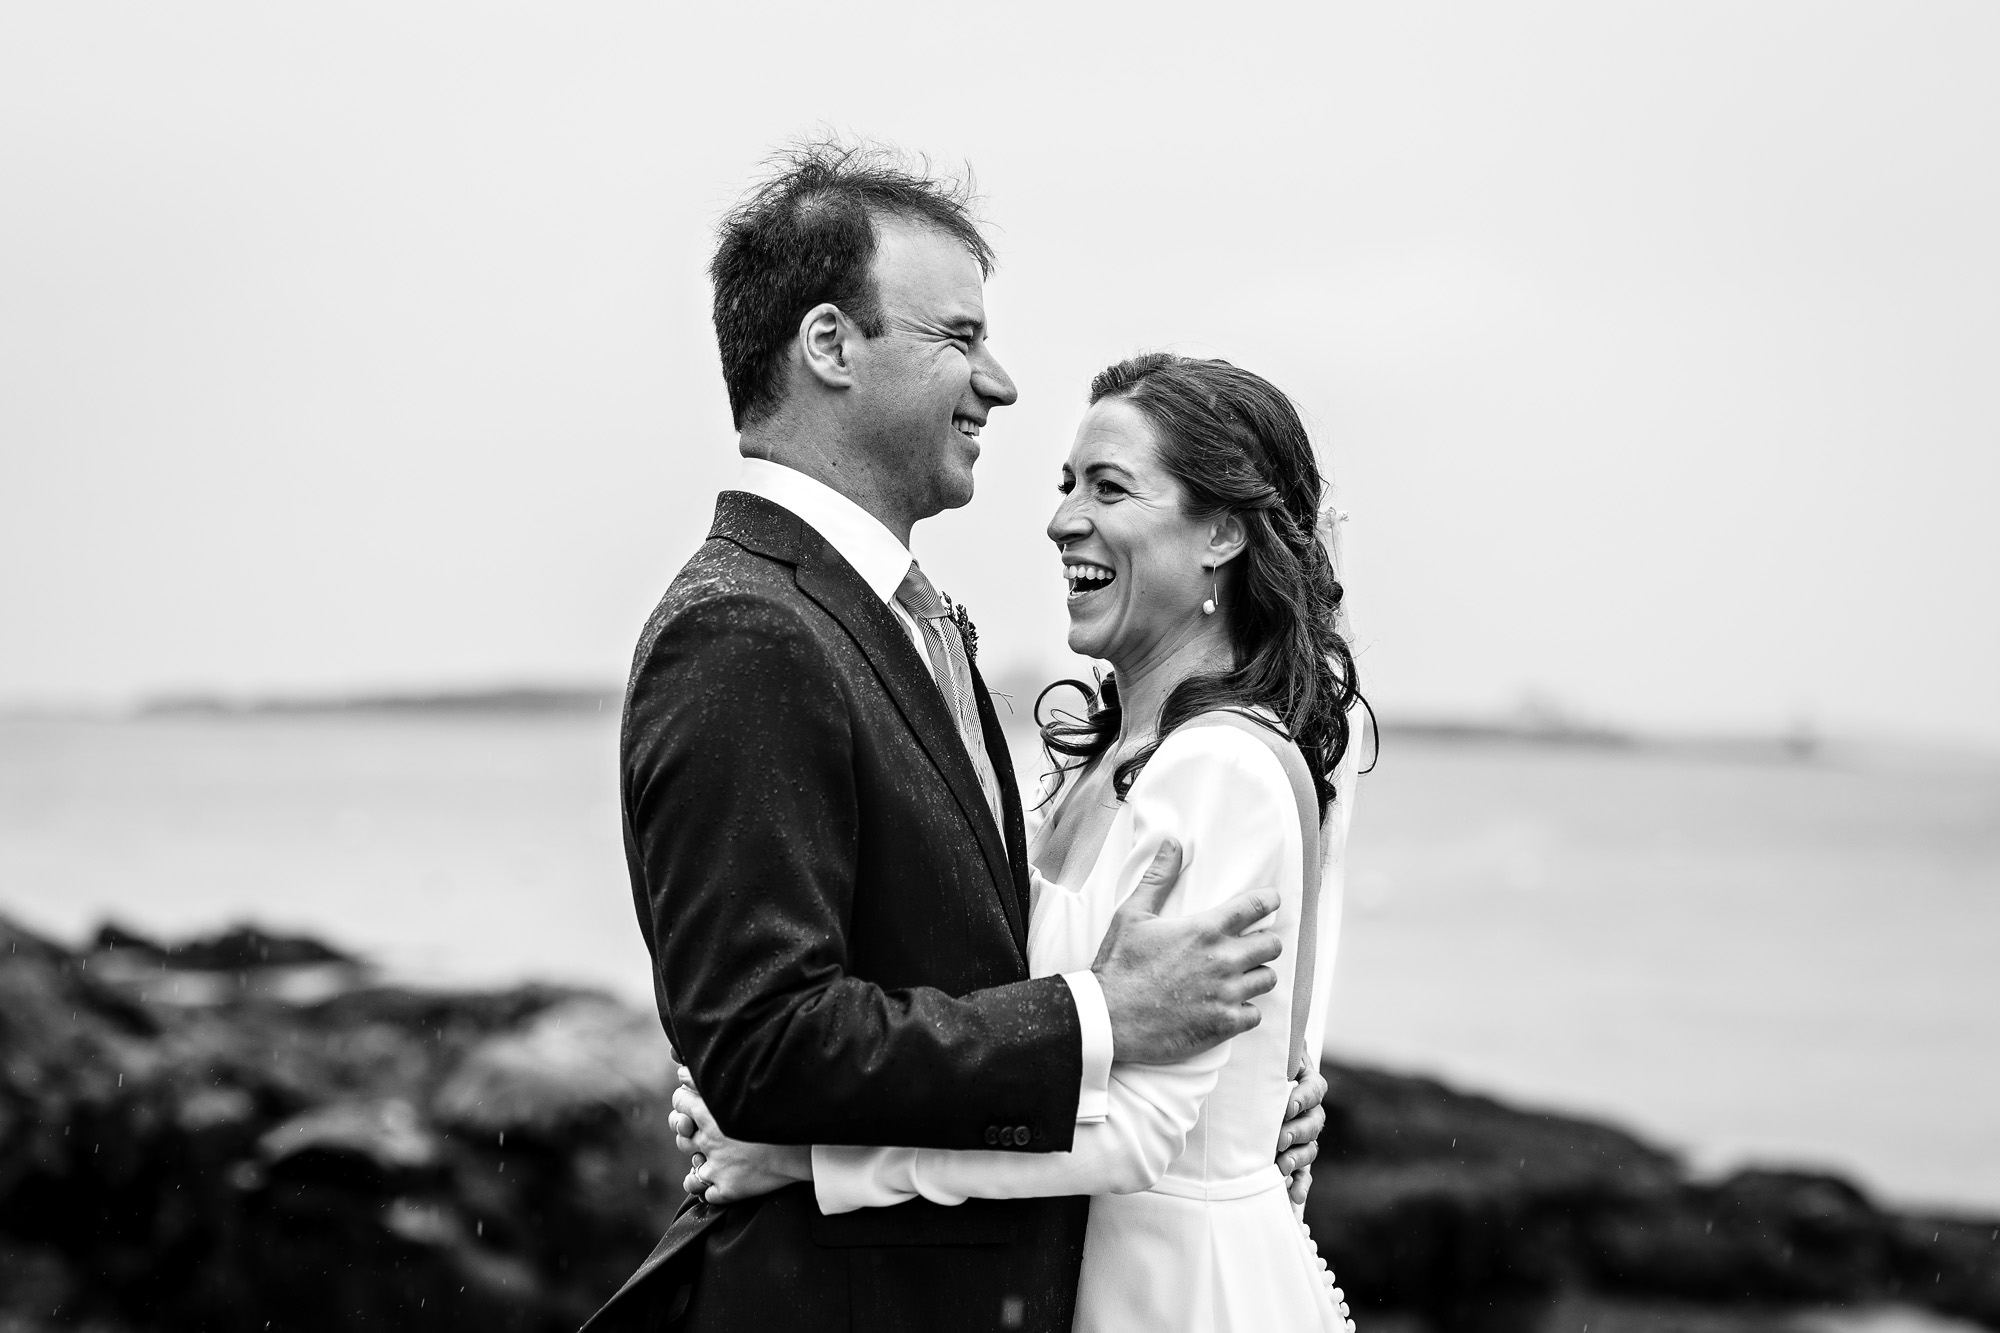 Happy and rainy wedding portraits in Boothbay Harbor, Maine